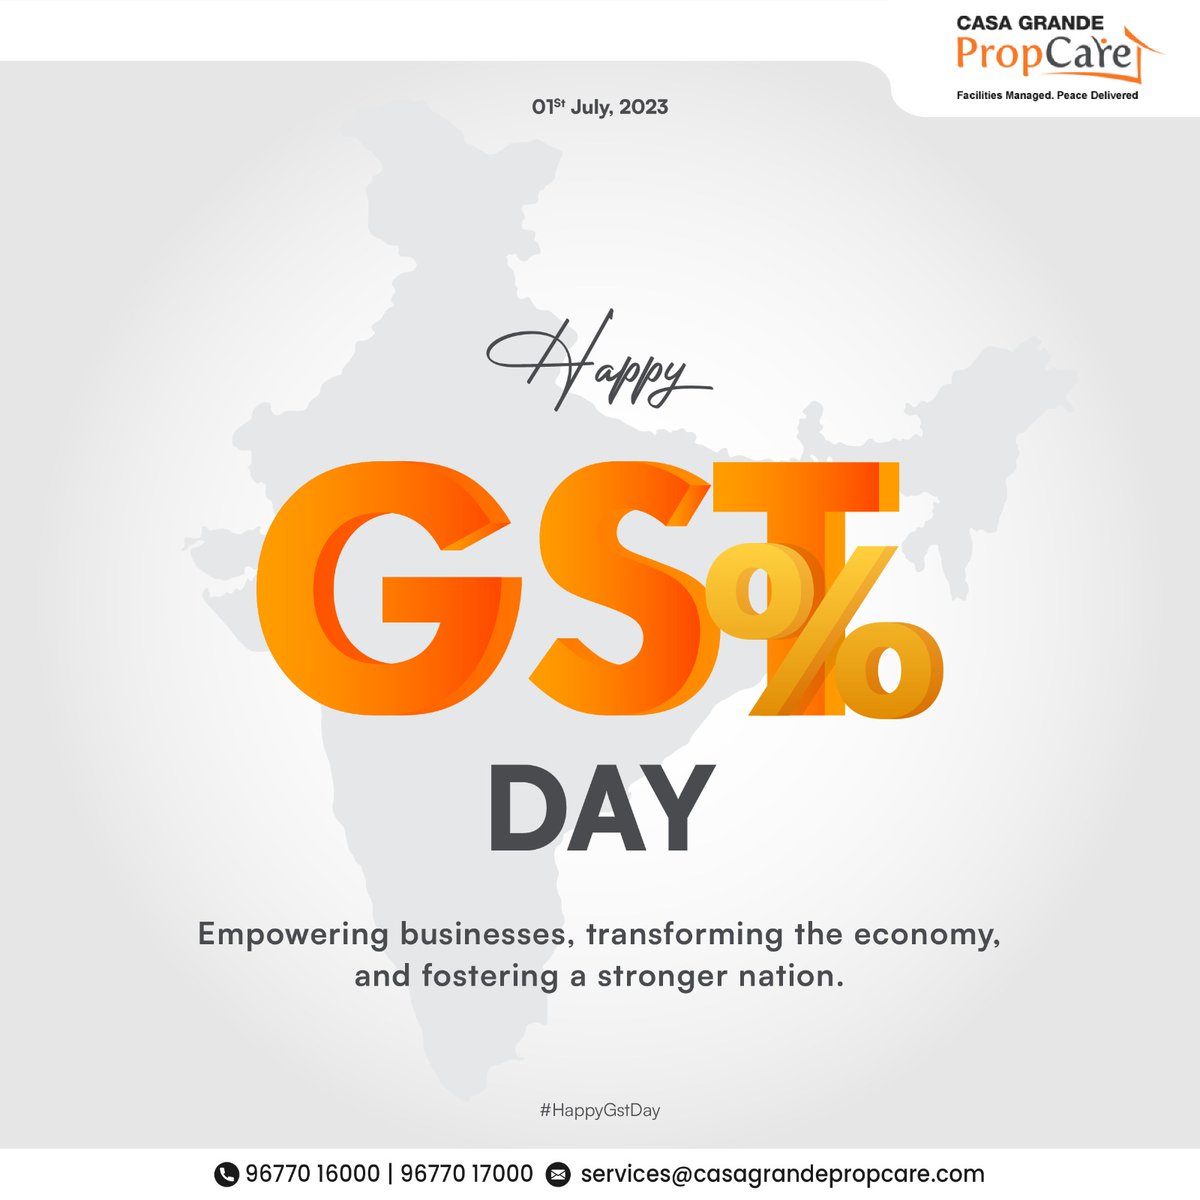 Happy GST Day! Today marks the anniversary of the game-changing Goods and Services Tax that has simplified tax compliance and boosted economic growth. Let's continue working together to build a stronger and more prosperous nation. ✨✨

#GSTForGrowth #TaxationMatters